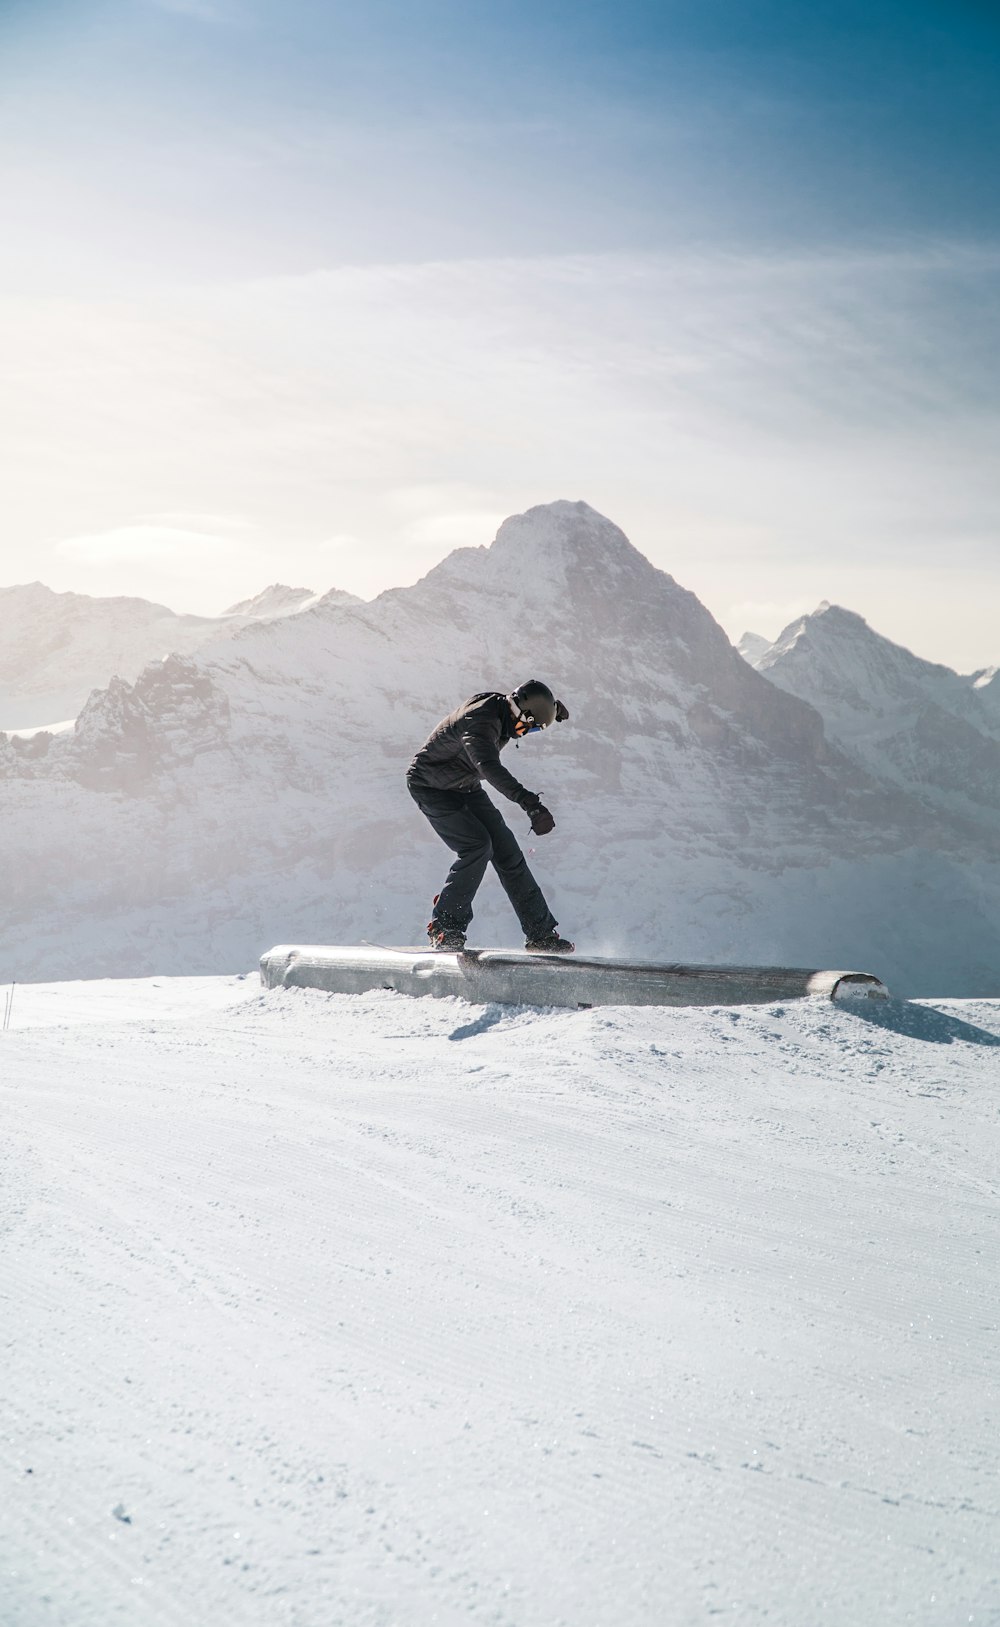 man in black jacket and black pants riding on snowboard on snow covered mountain during daytime